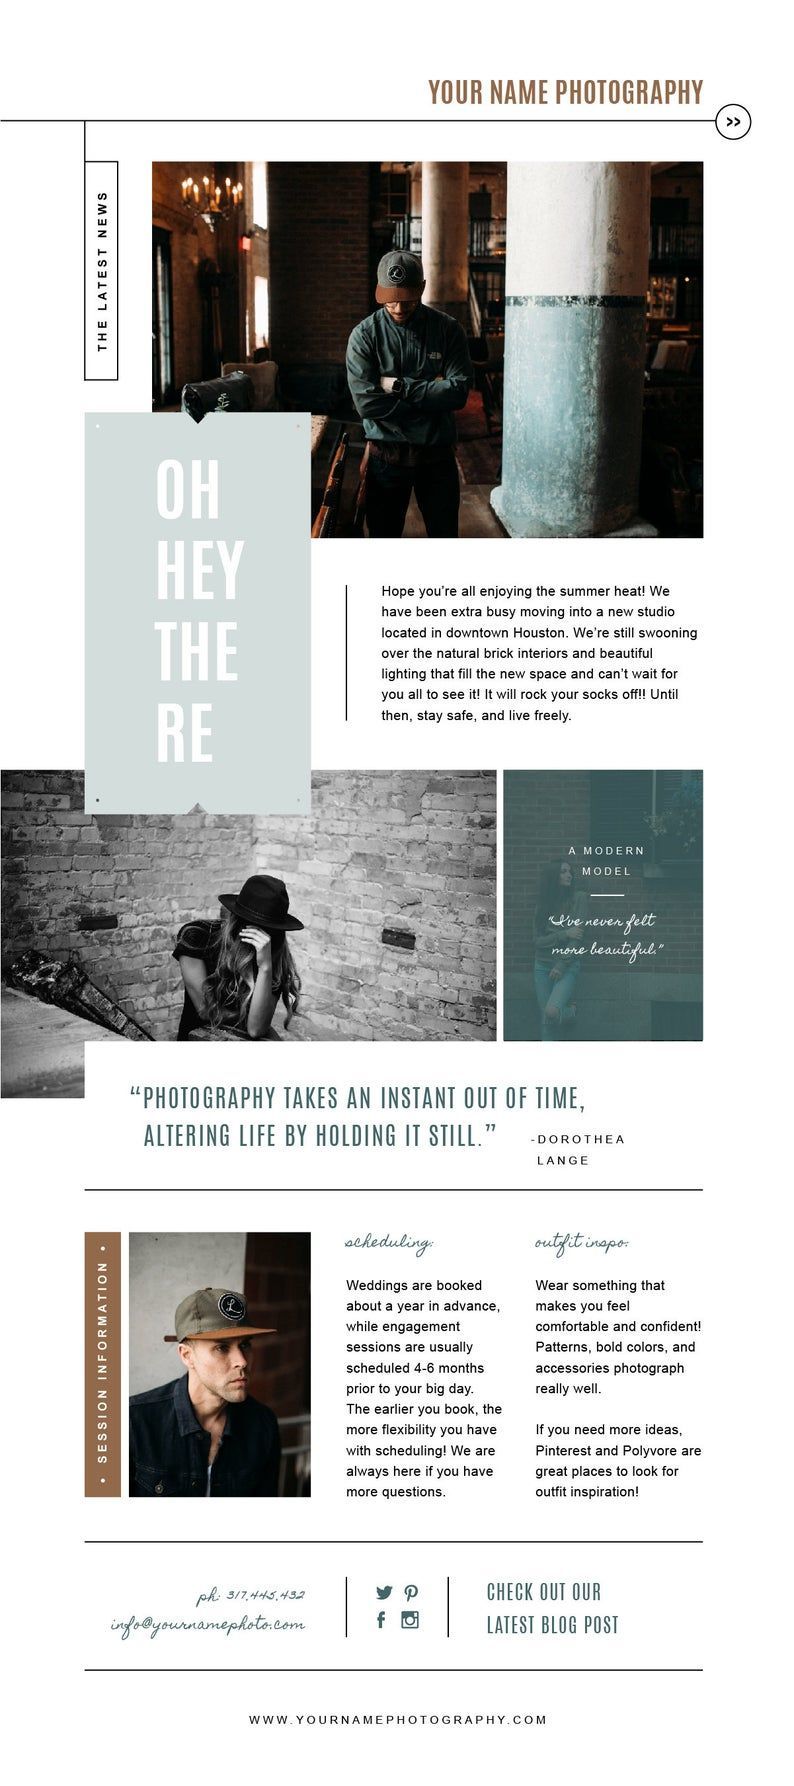 SALE! Newsletter Template for Email, Pinterest, and Social Media - Photography Marketing Templates - Magazine Style Newsletter Design - SALE! Newsletter Template for Email, Pinterest, and Social Media - Photography Marketing Templates - Magazine Style Newsletter Design -   14 magazine style Guides ideas